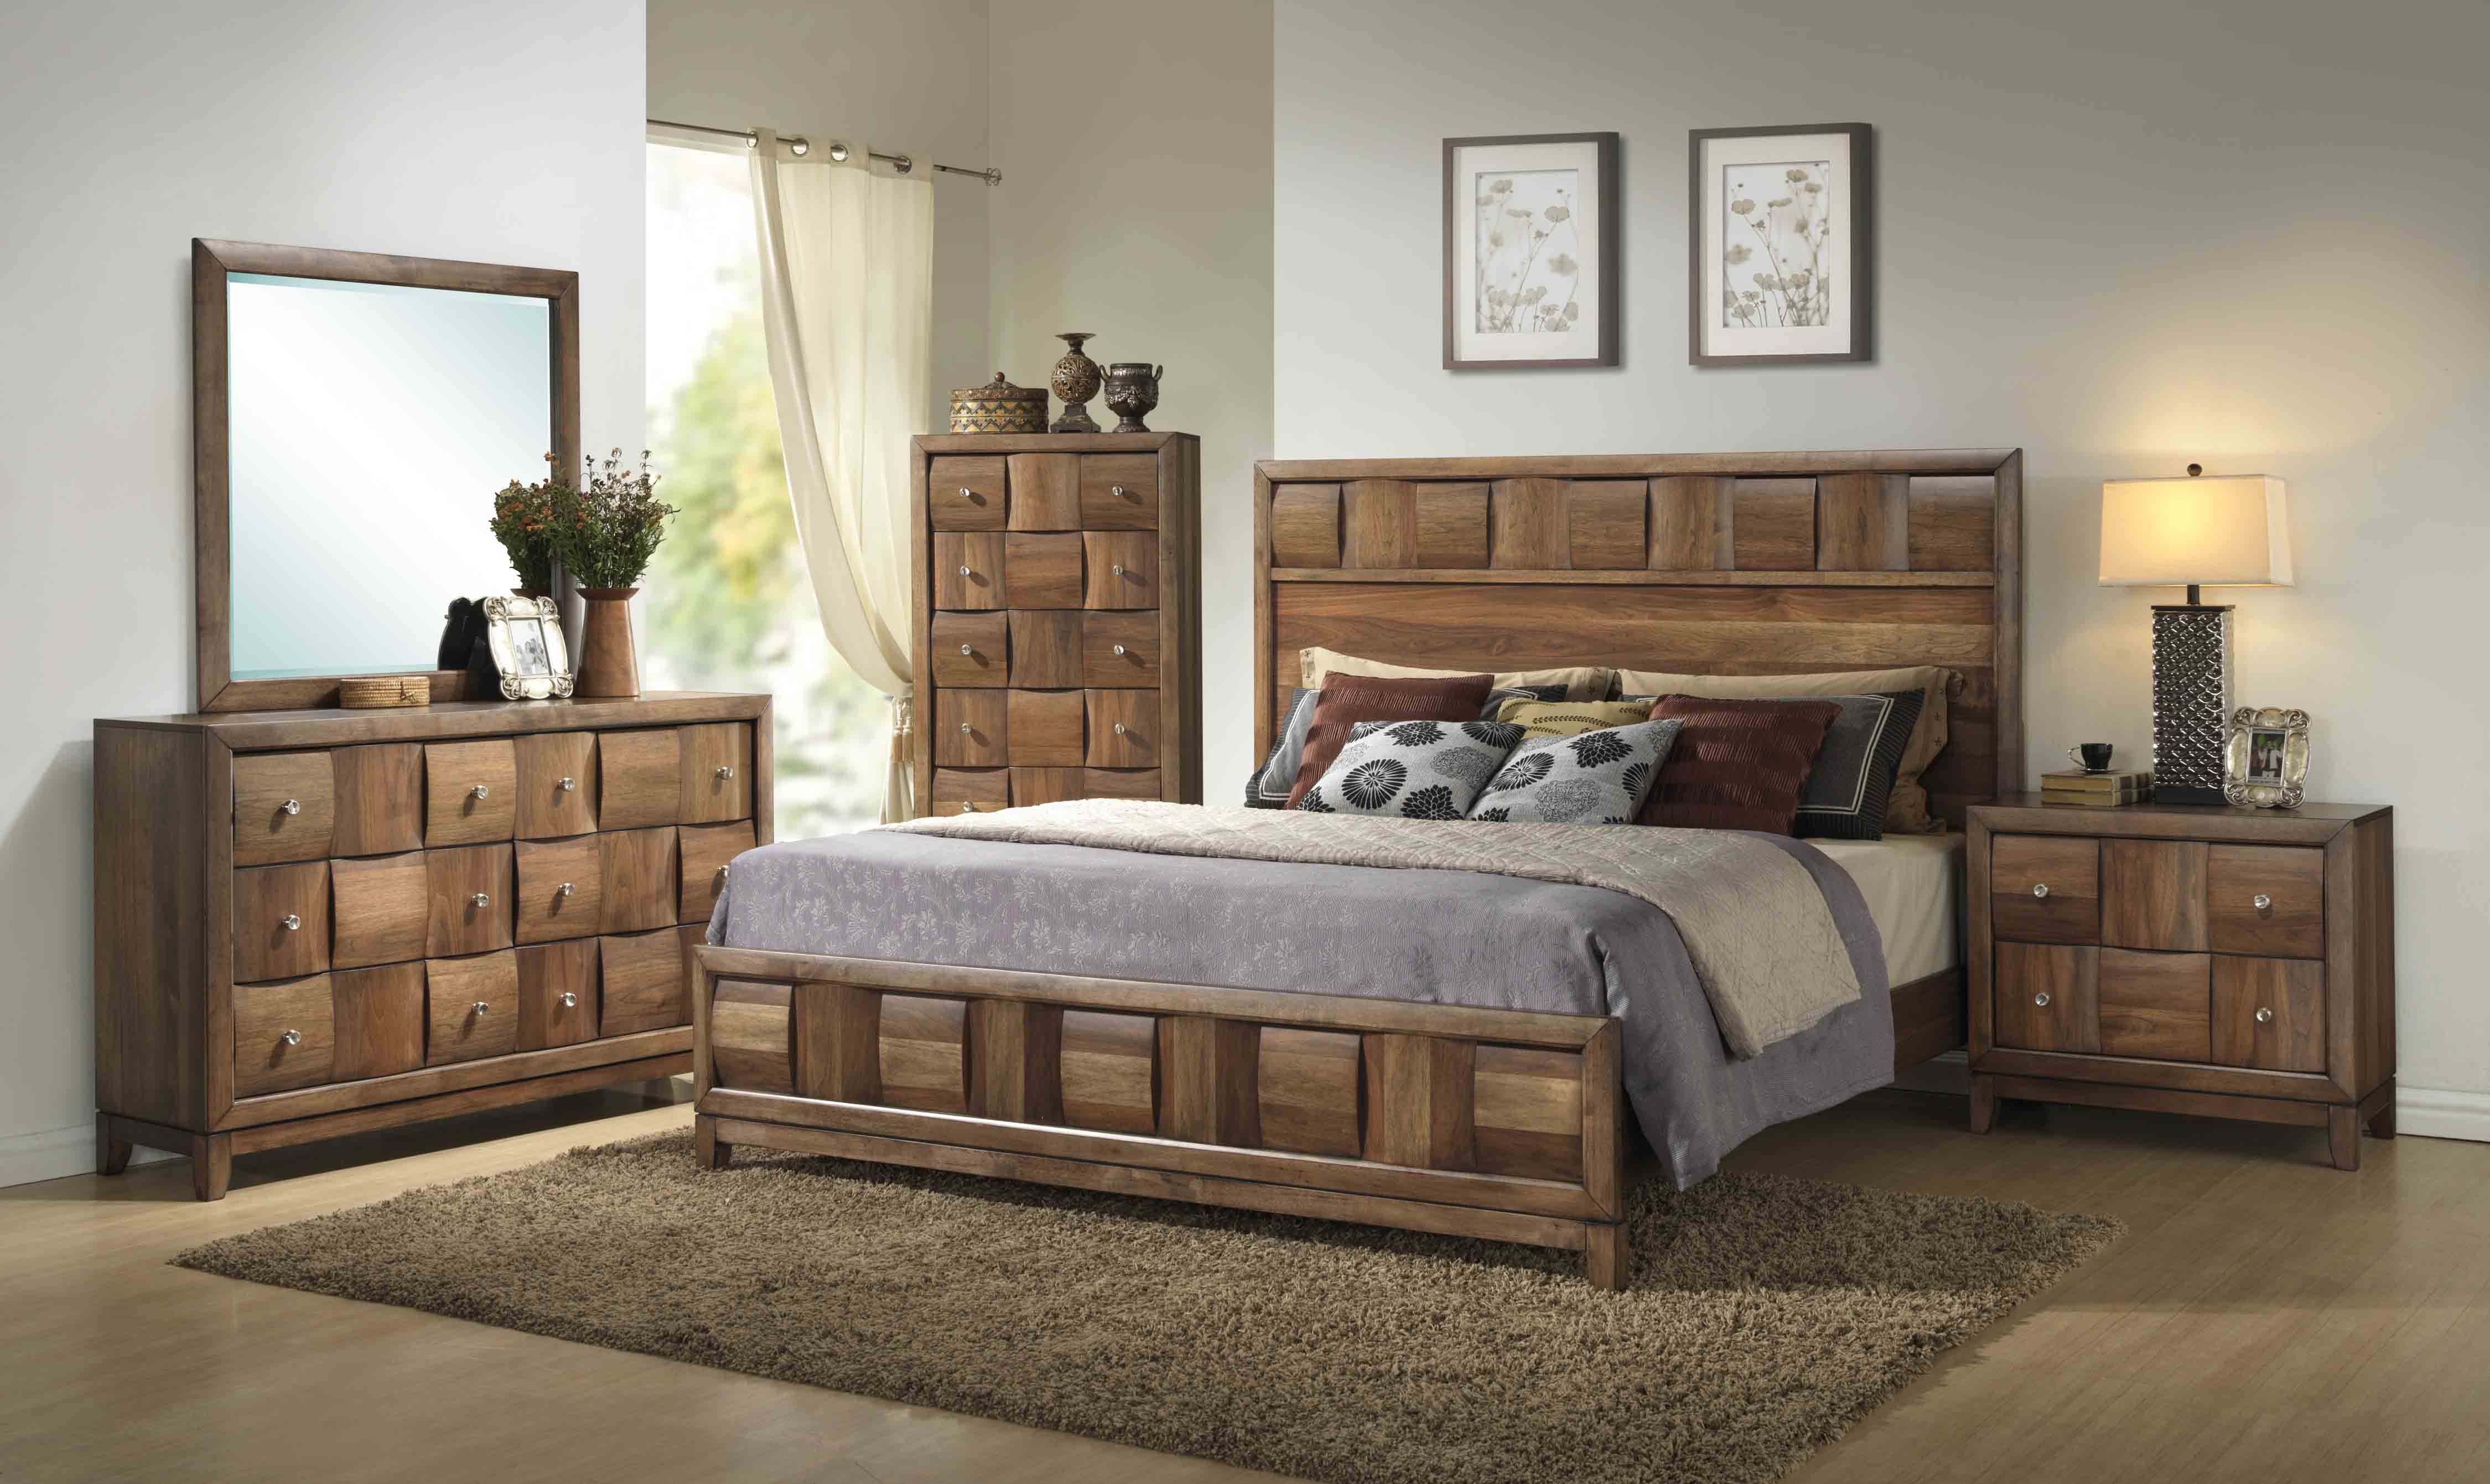 solid wood bedroom furniture offers sturdy options UCEMPQI